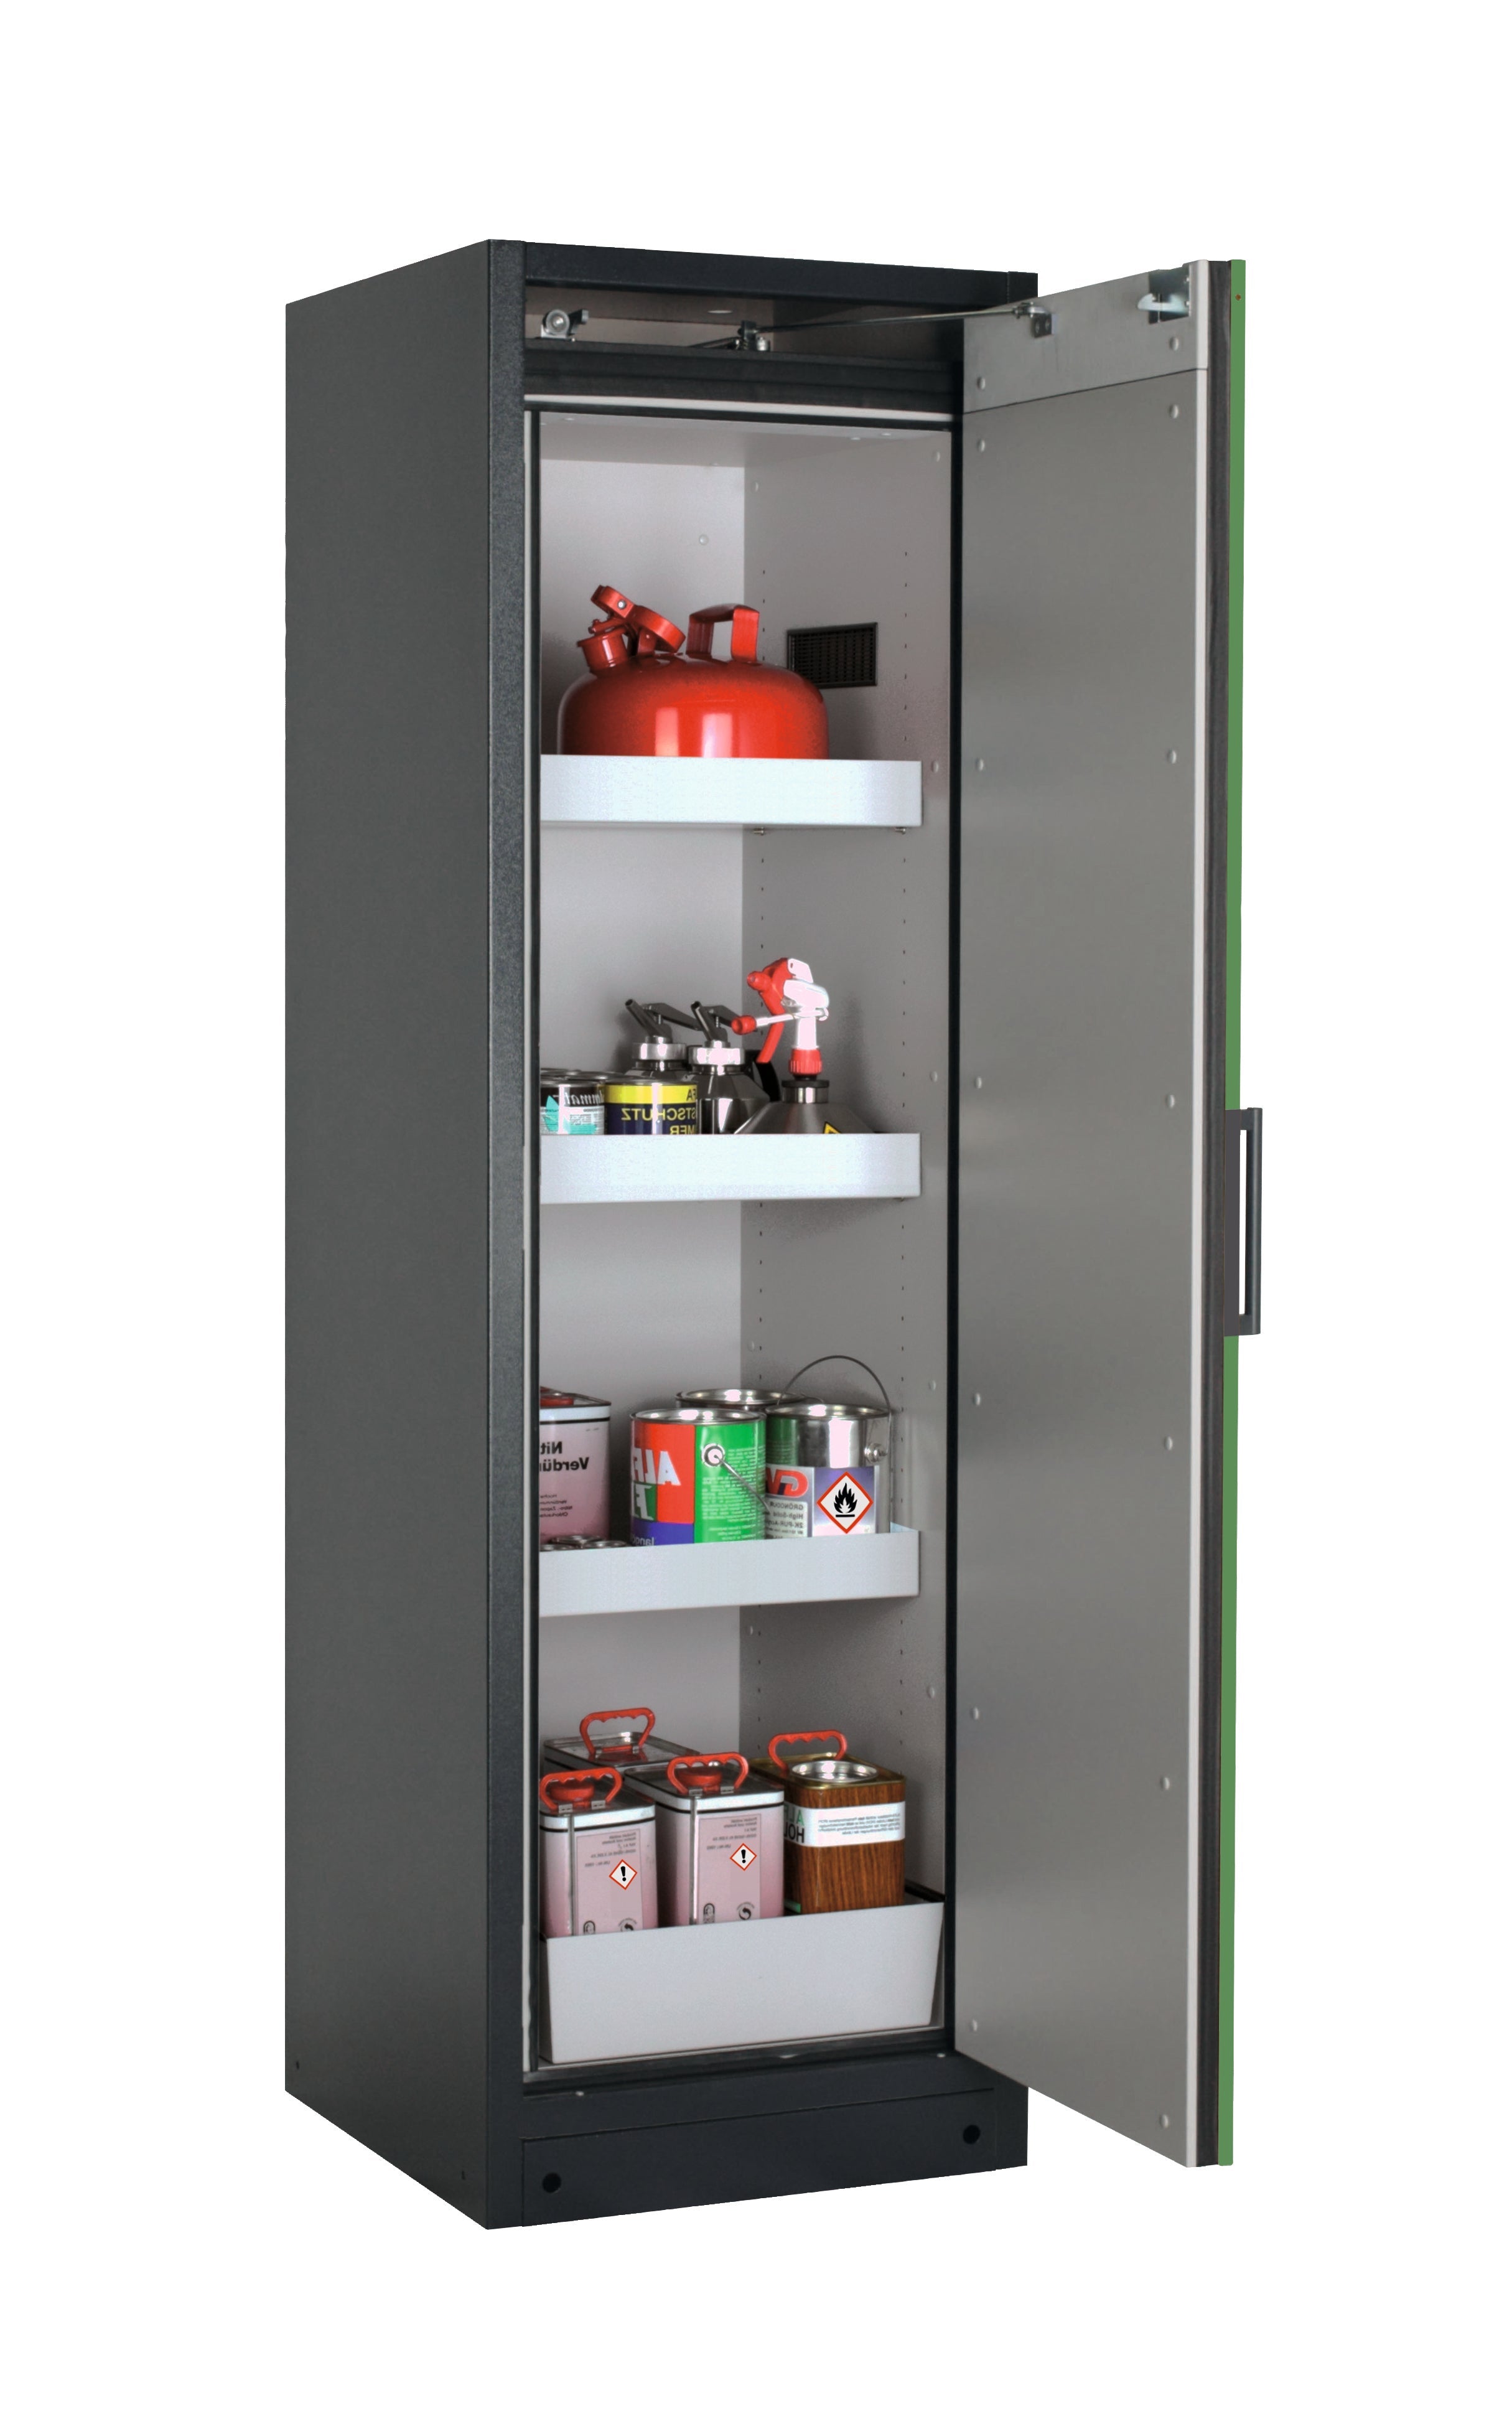 Type 90 safety storage cabinet Q-CLASSIC-90 model Q90.195.060.R in reseda green RAL 6011 with 3x tray shelf (standard) (sheet steel),